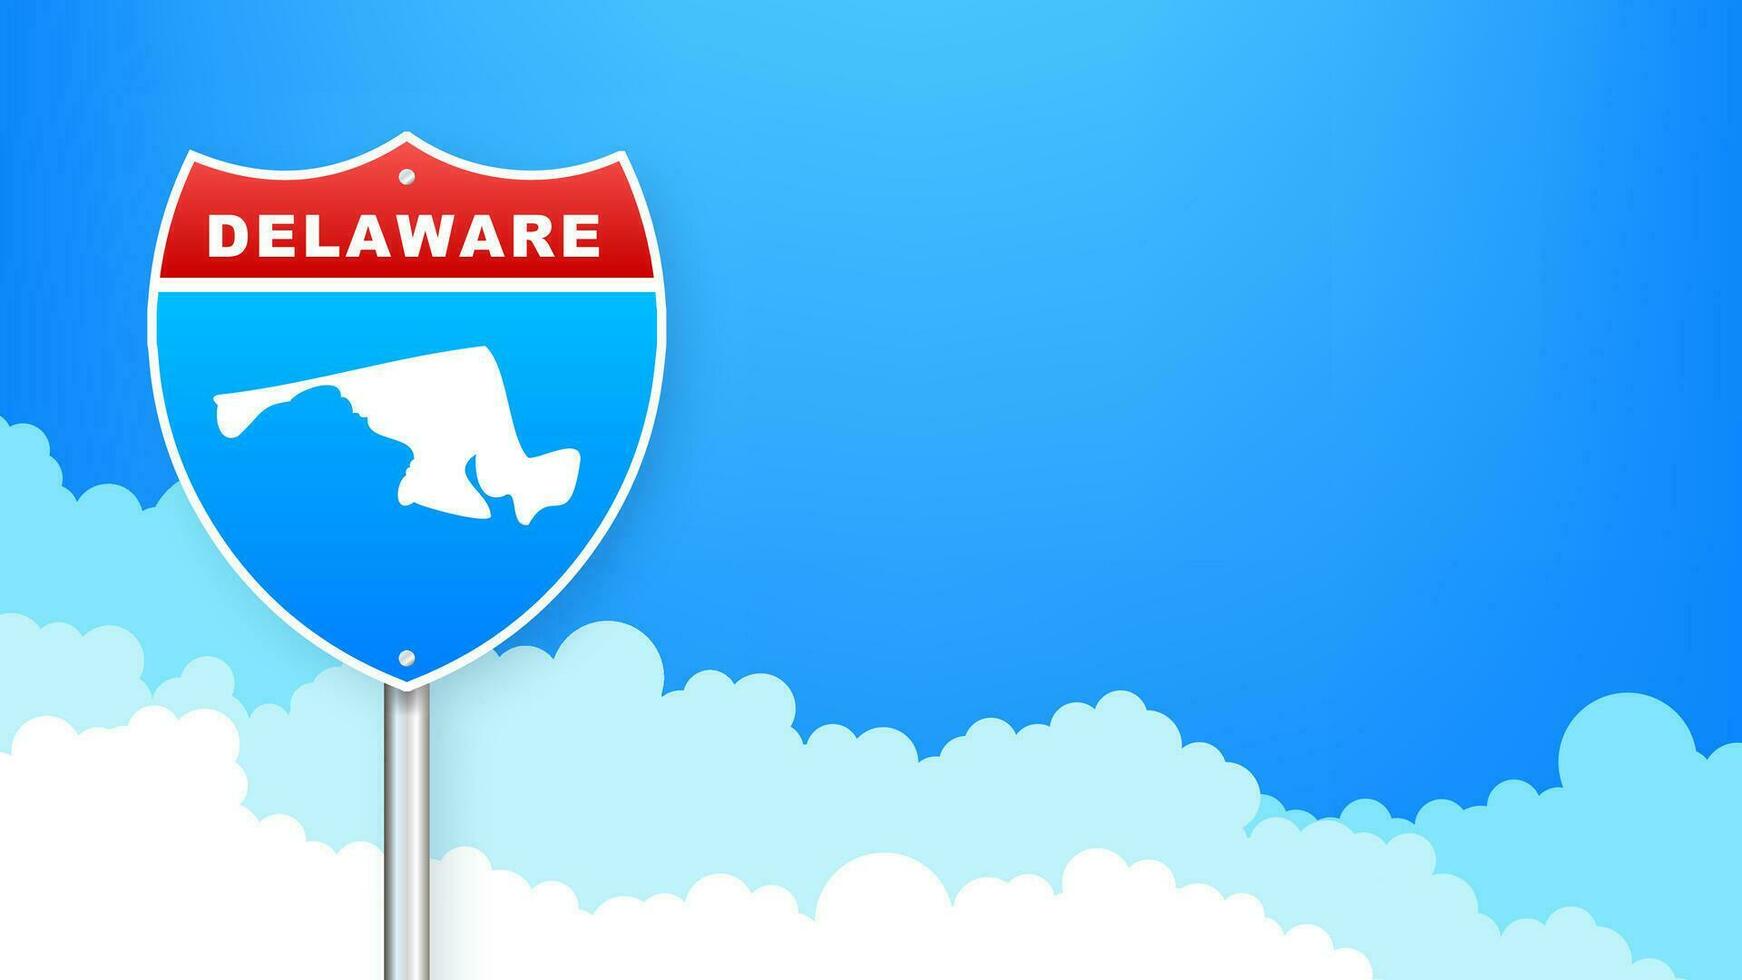 Delaware map on road sign. Welcome to State of Delaware. Vector illustration